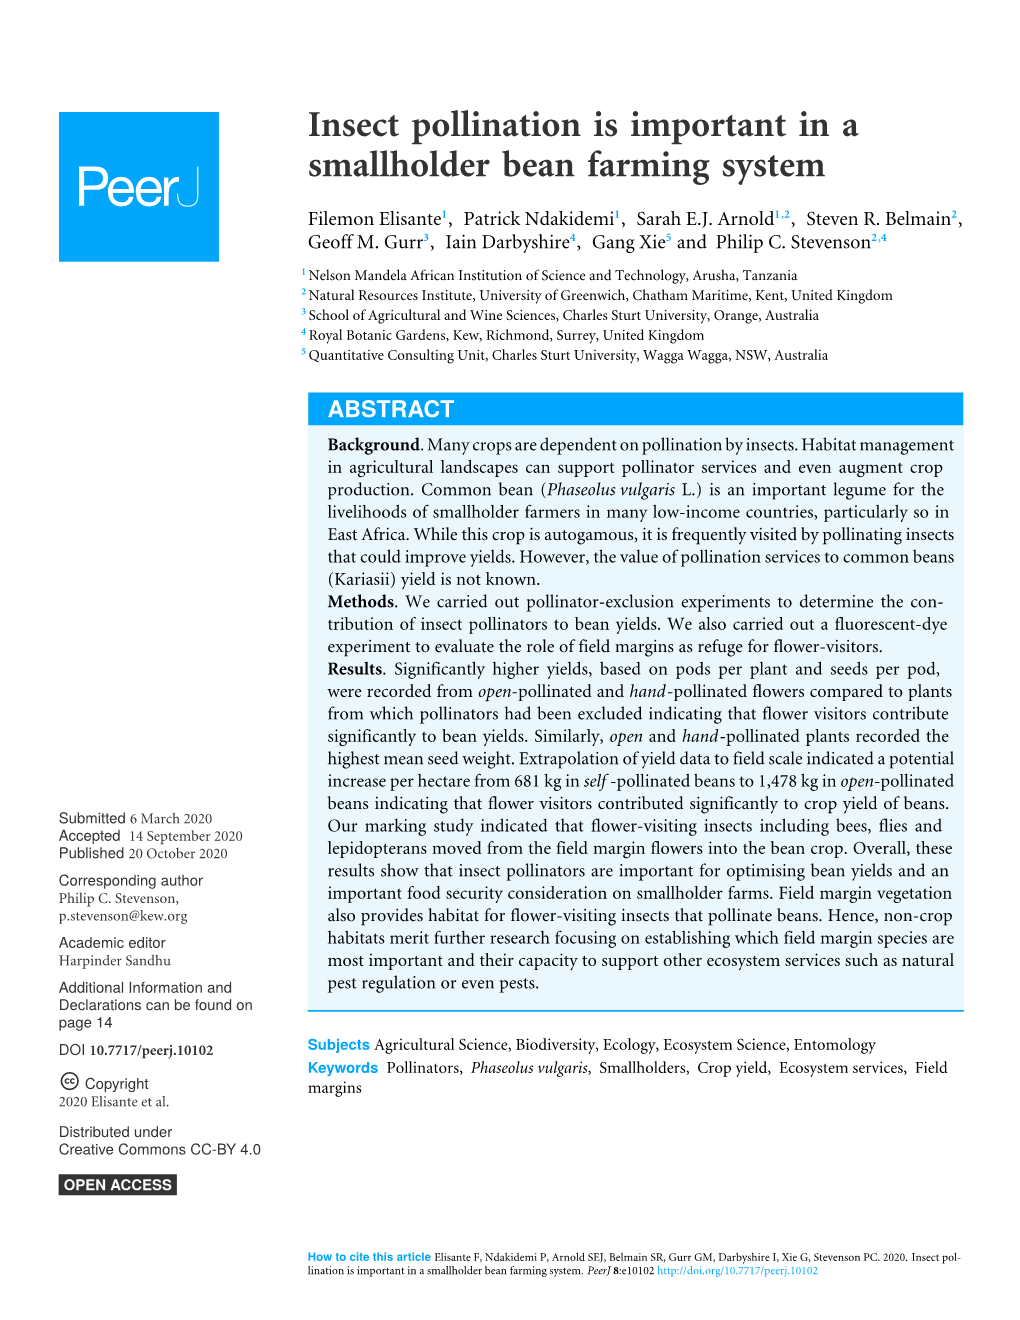 Insect Pollination Is Important in a Smallholder Bean Farming System